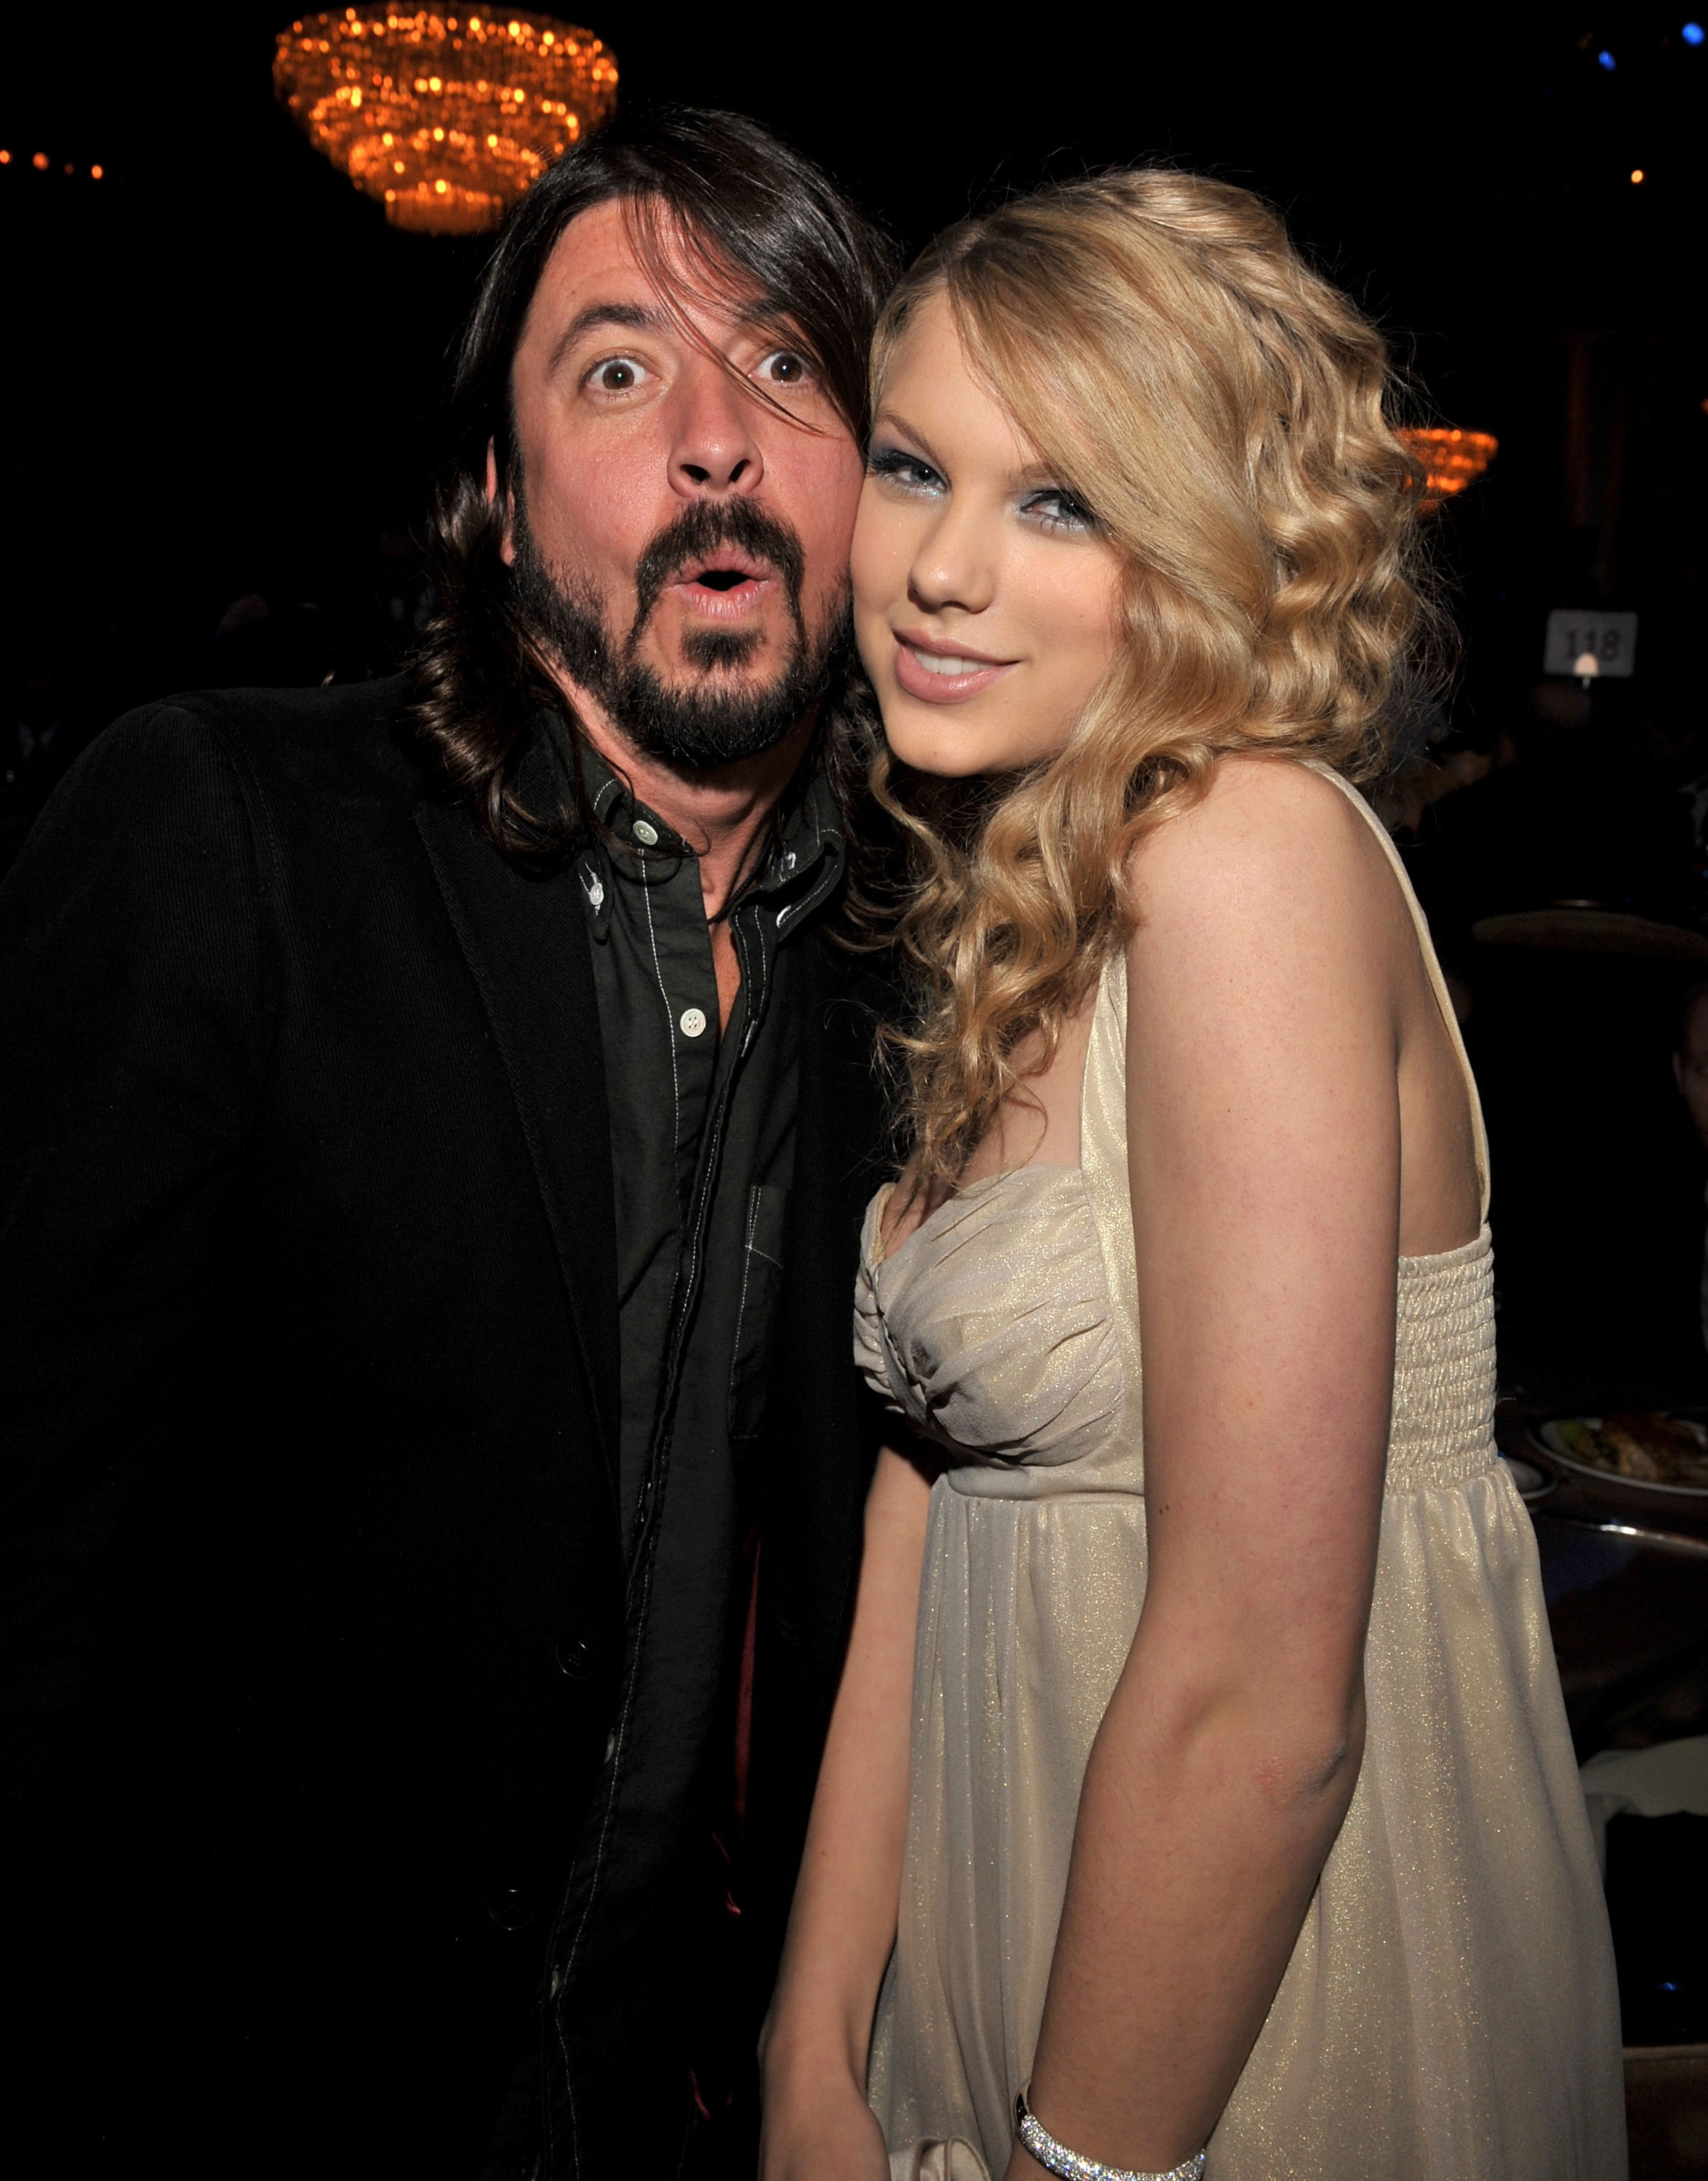 Dave Grohl and Taylor Swift posing together at an event, with Taylor wearing a sleeveless gown and Dave in a suit